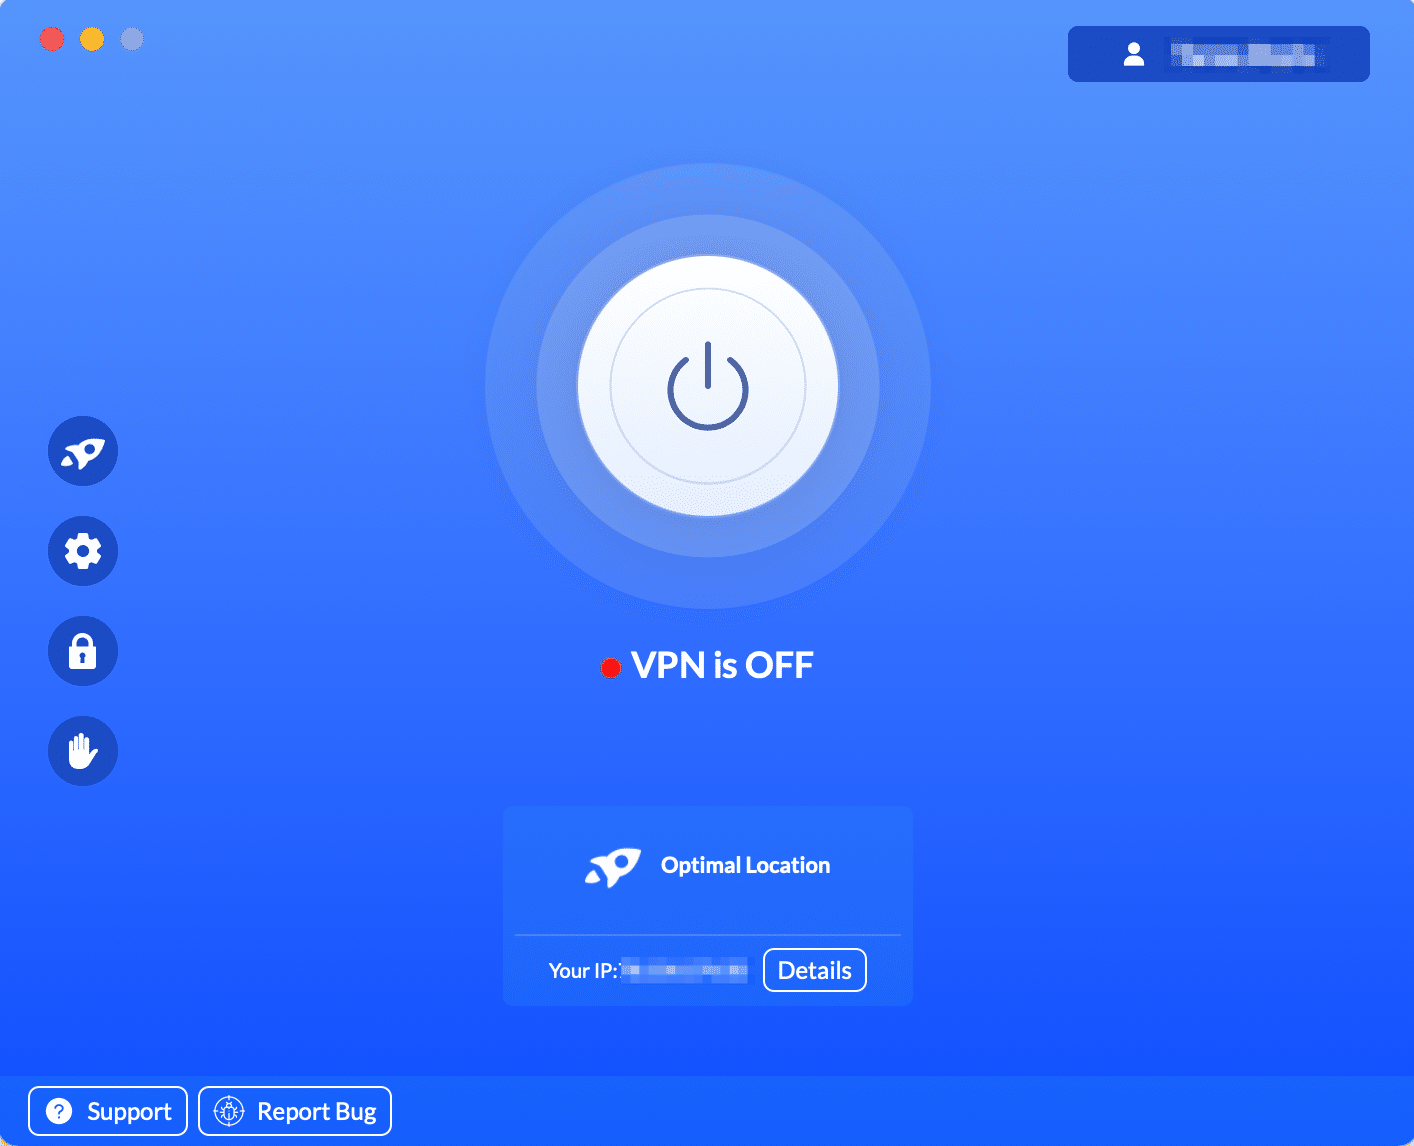 Install and open the VeePN app